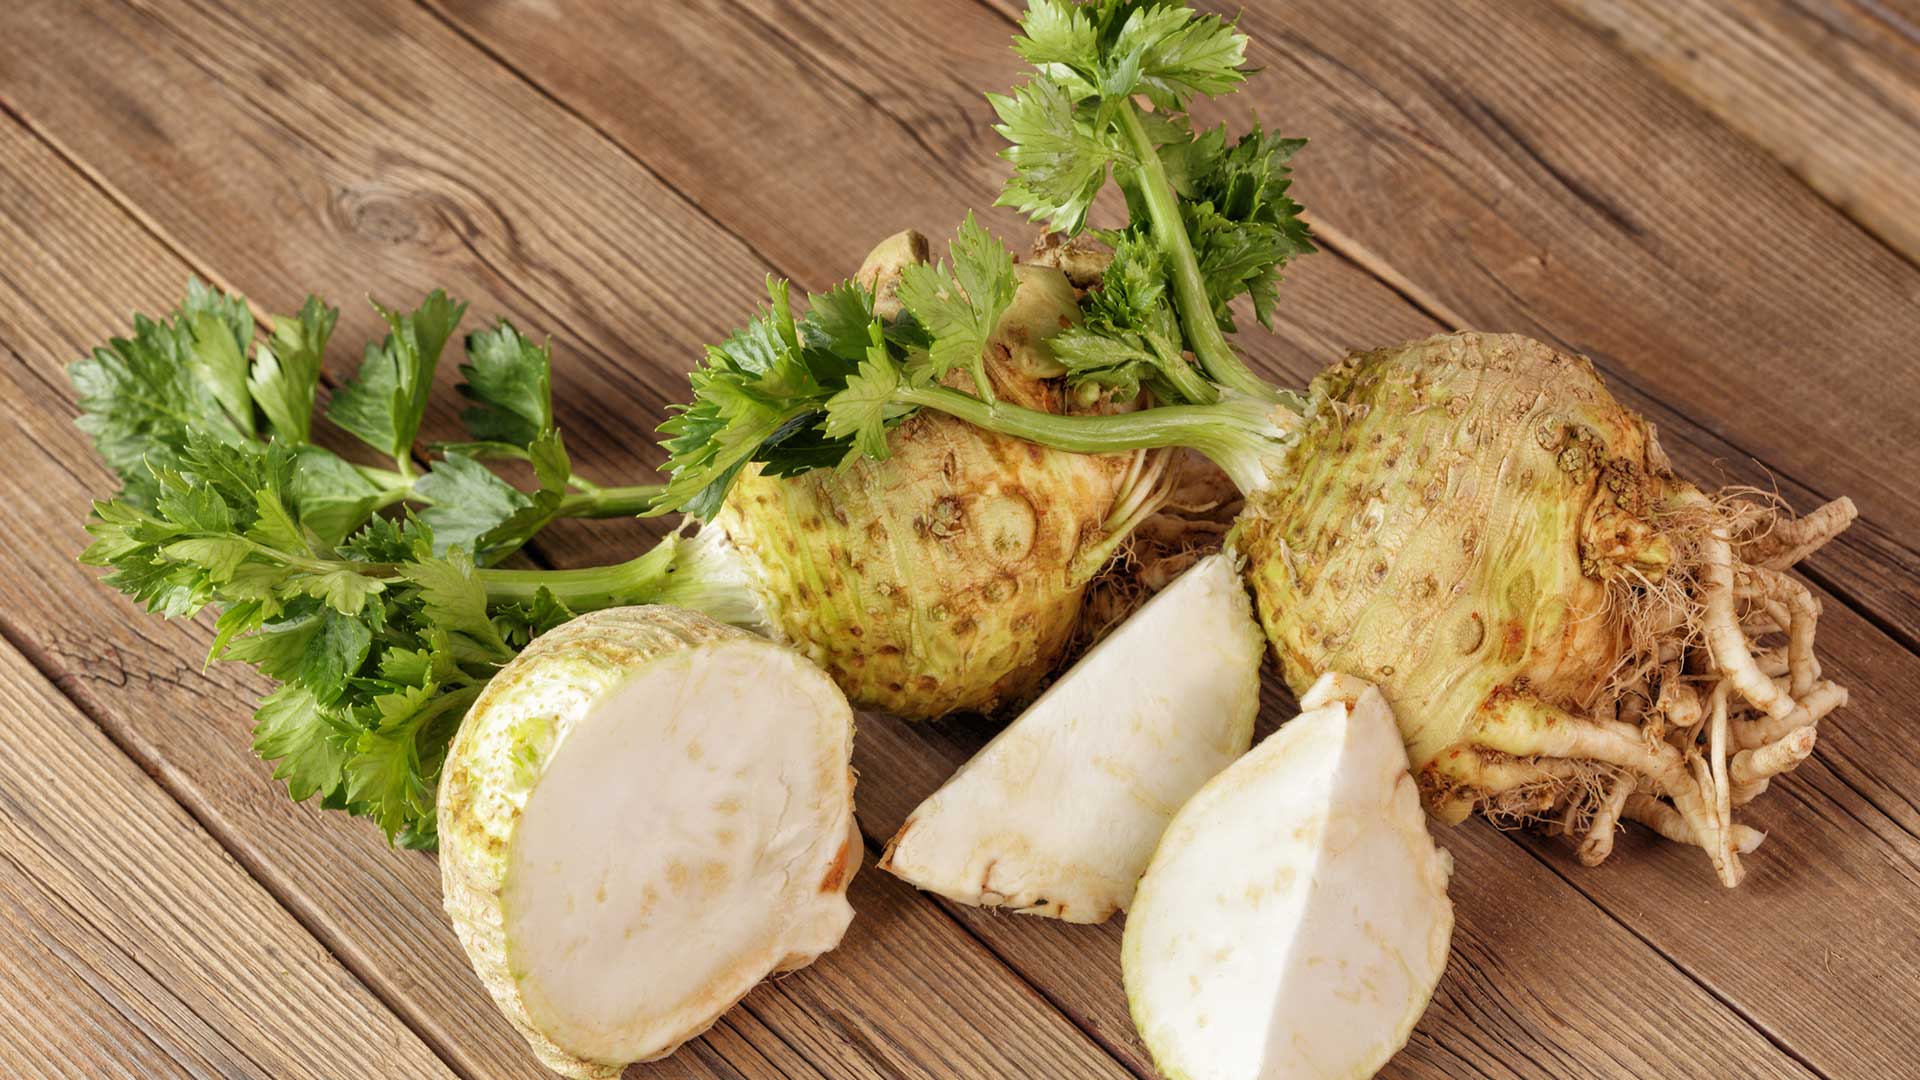 Celery Root – Packed with Flavor and Nutrition